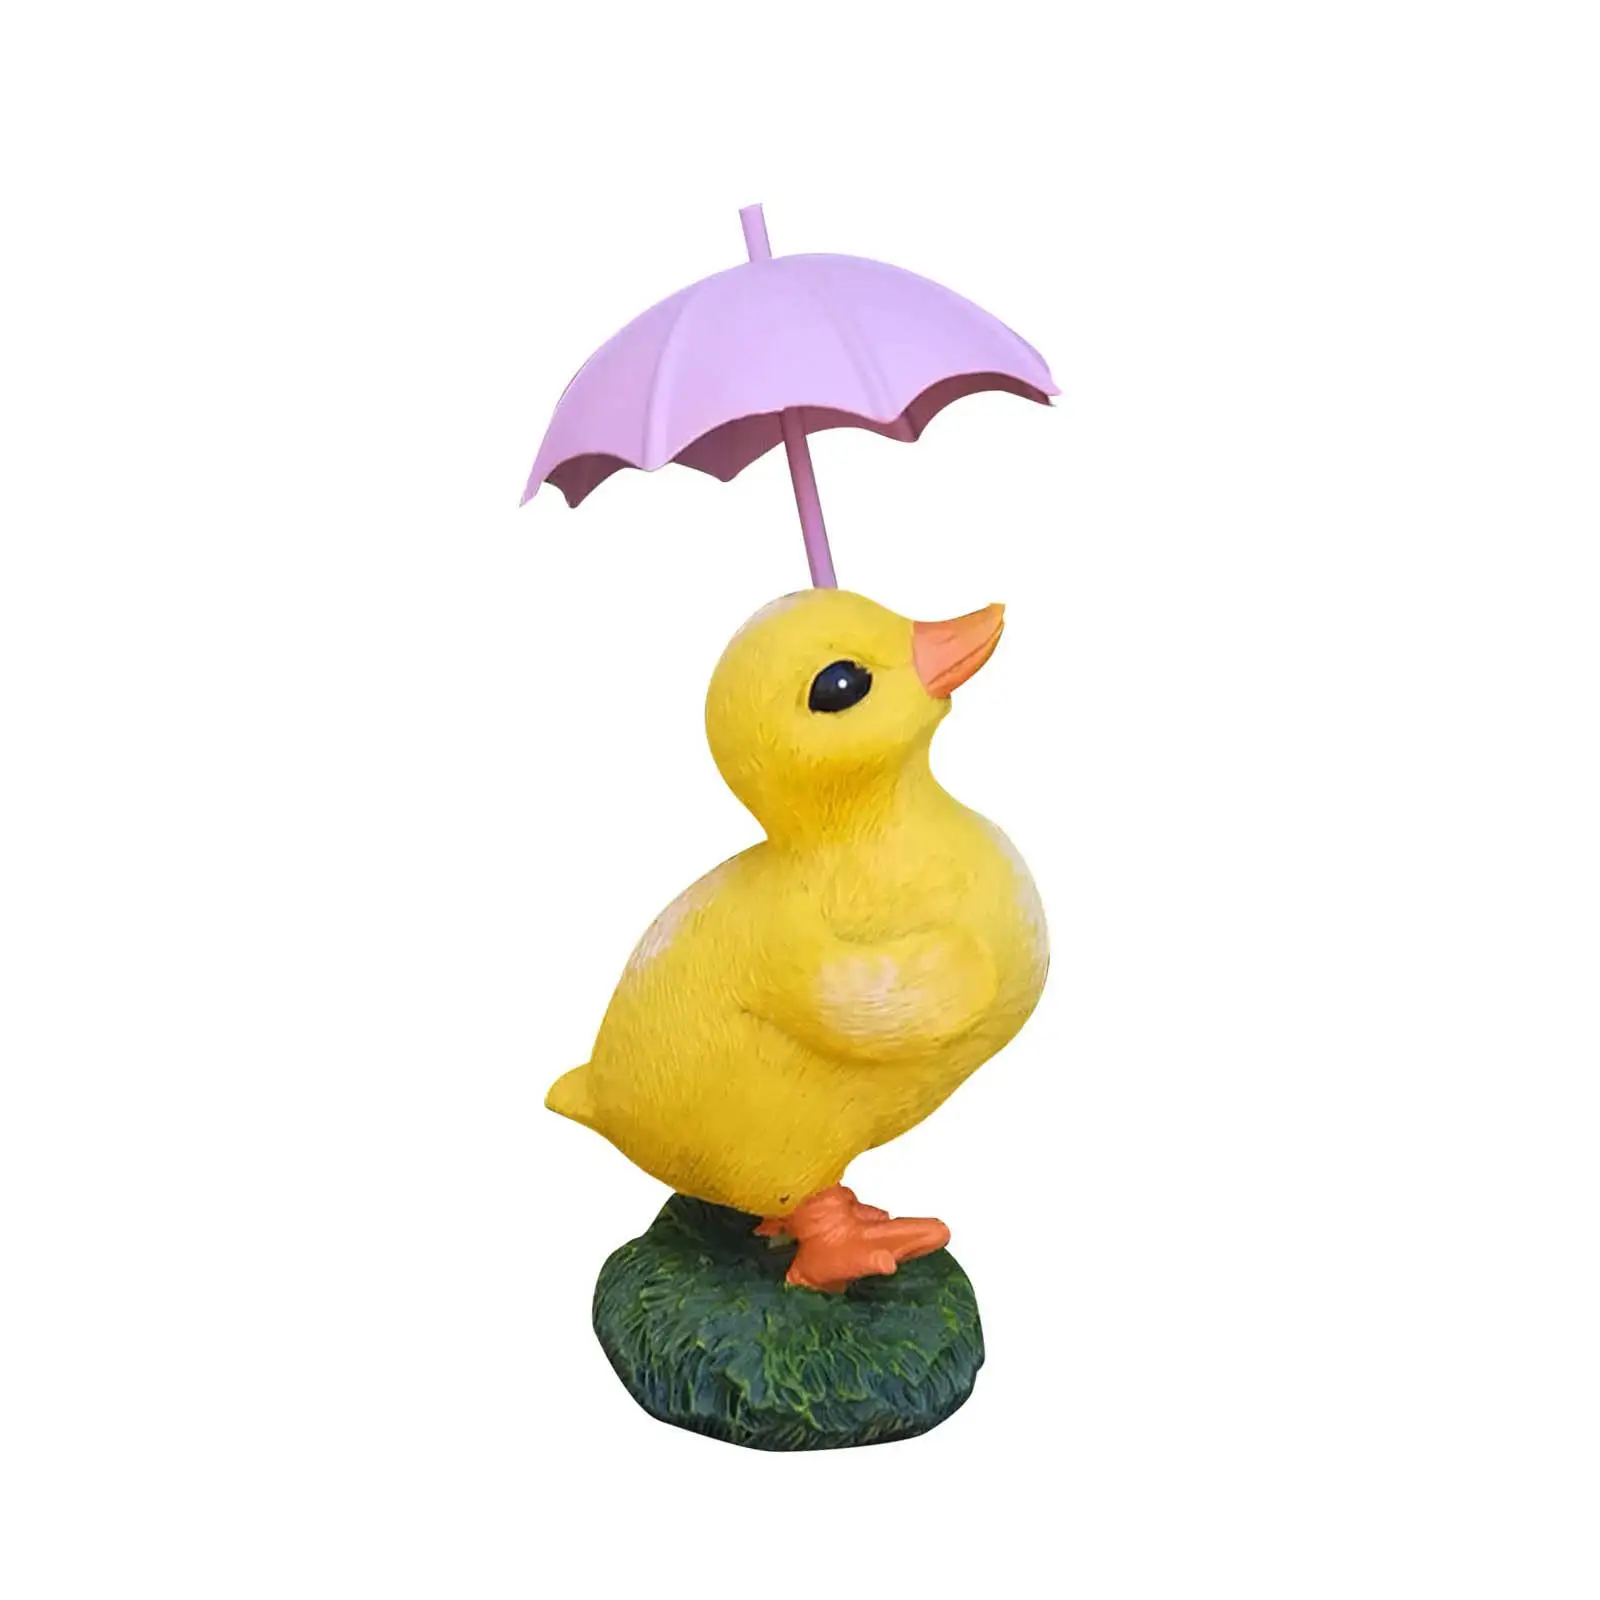 Resin Duck Statue Garden Decor Statues Figurines Outdoor Decor Duck Adornment Ornament for Courtyard Yard Porch Outdoor Outside